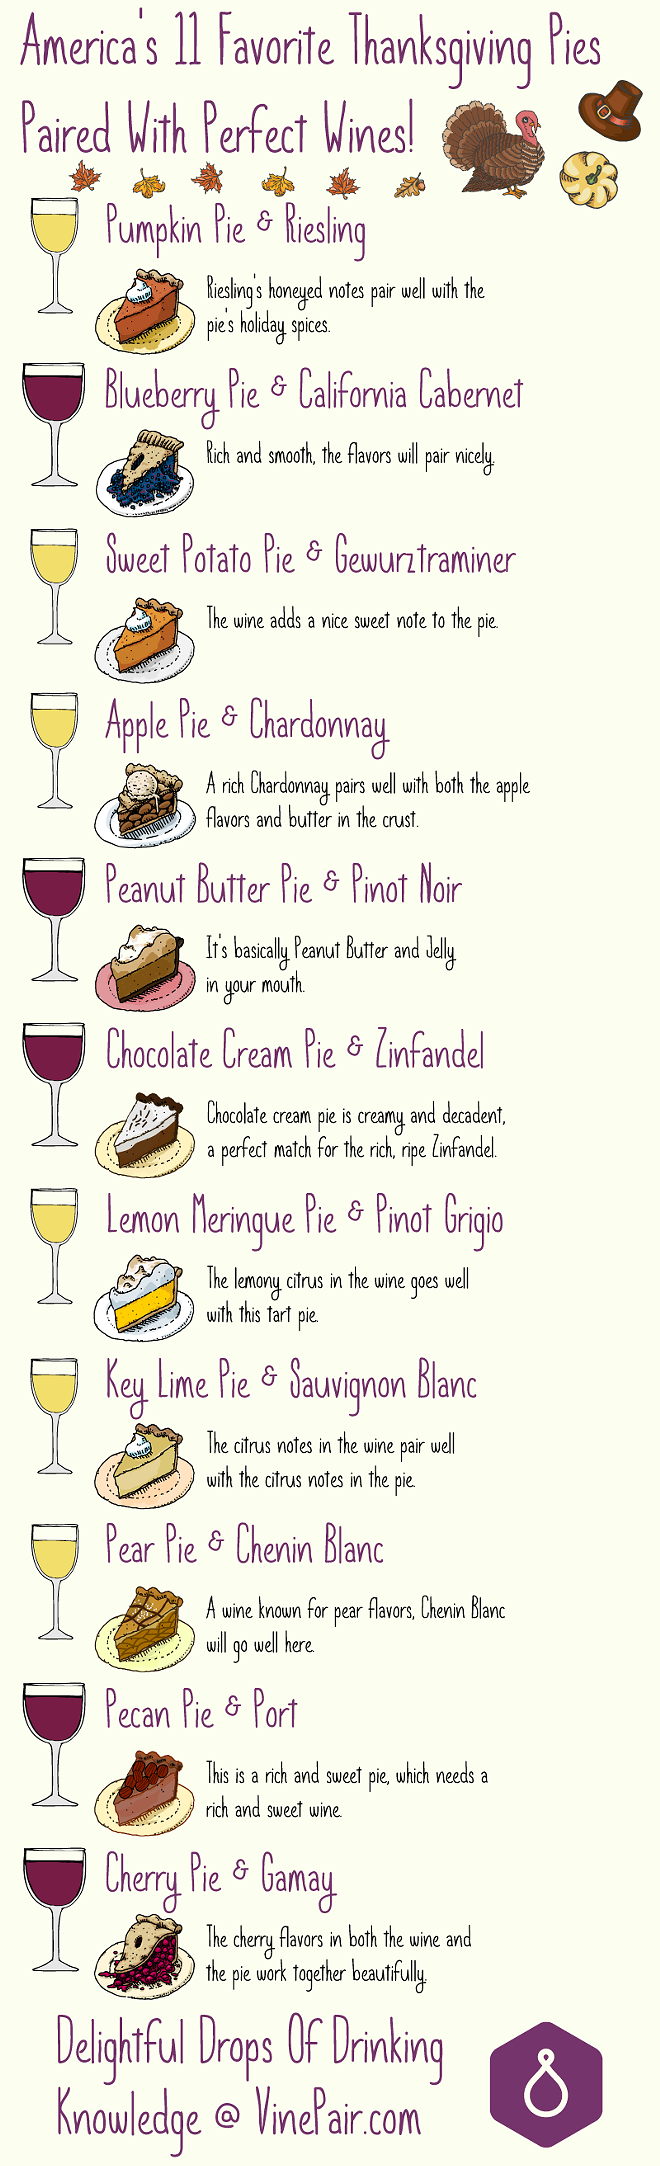 Wine pairings for your favorite Thanksgiving pies